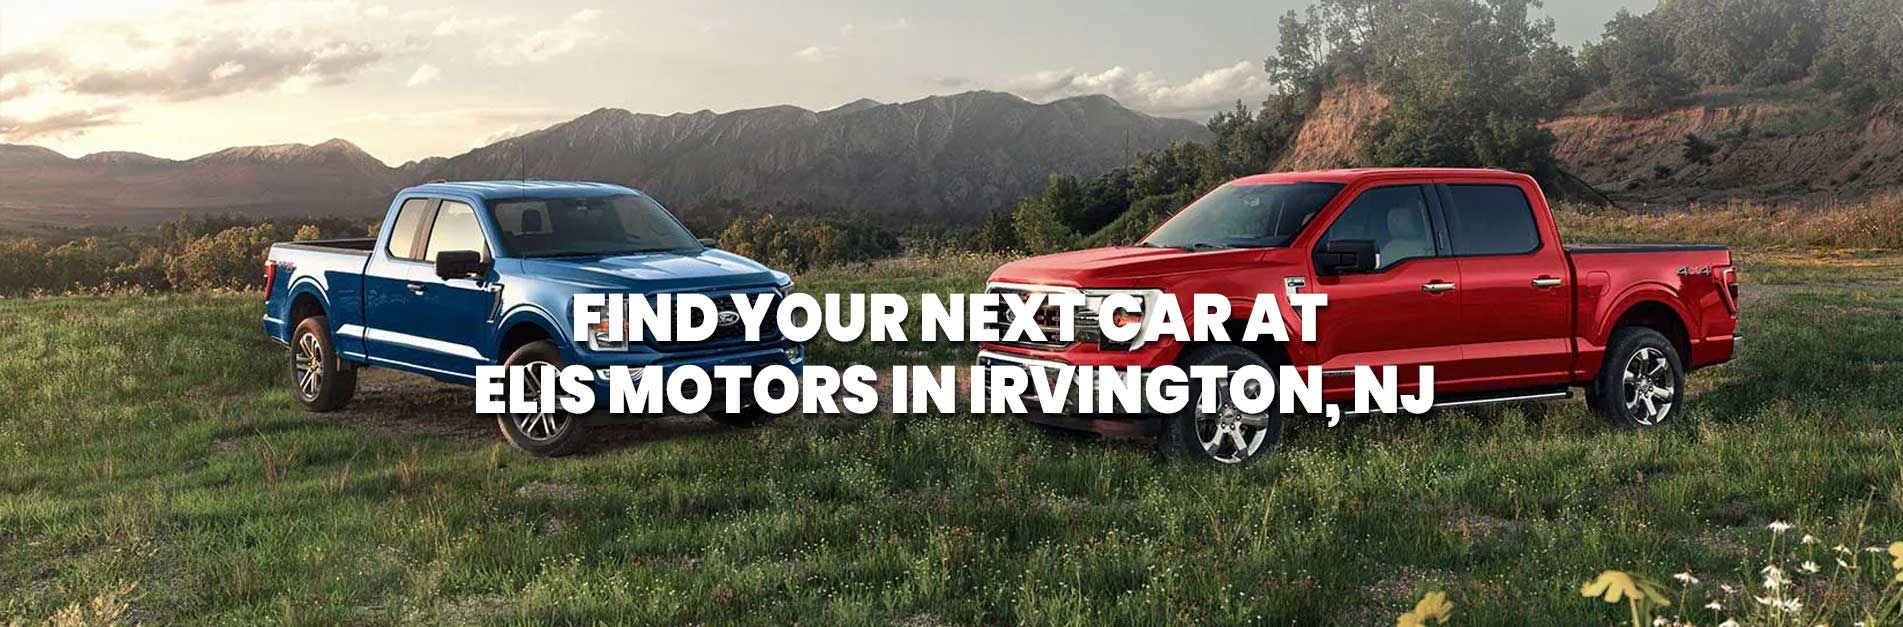 Used cars for sale in Irvington | Elis Motors Corp. Irvington New Jersey